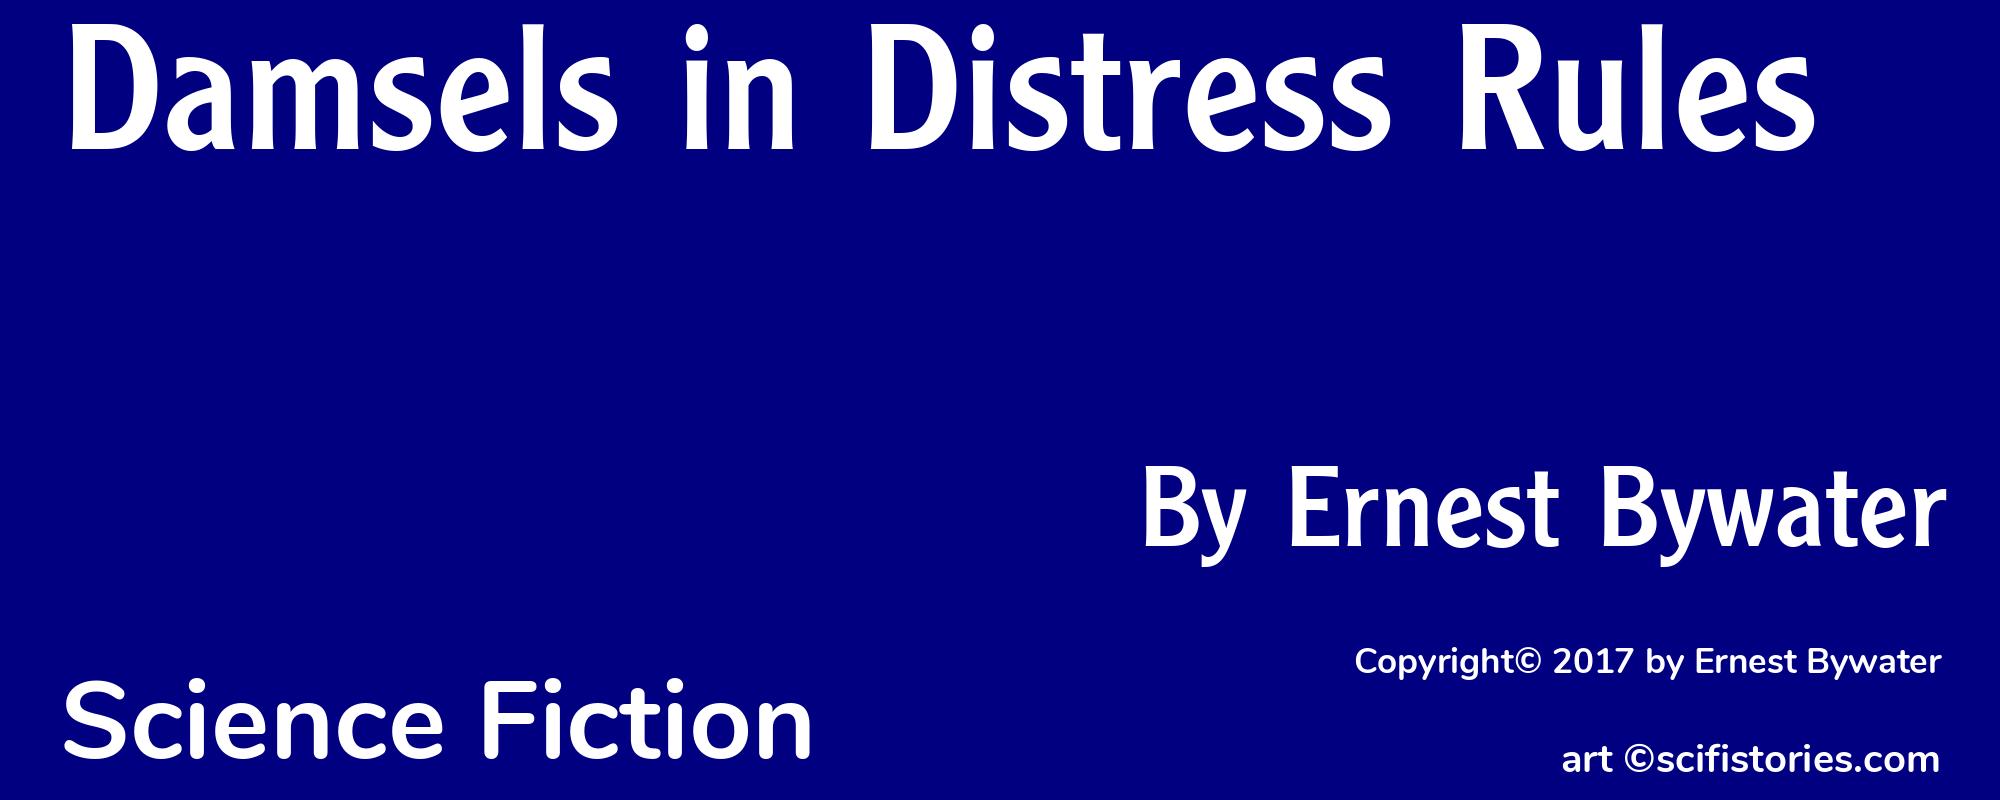 Damsels in Distress Rules - Cover